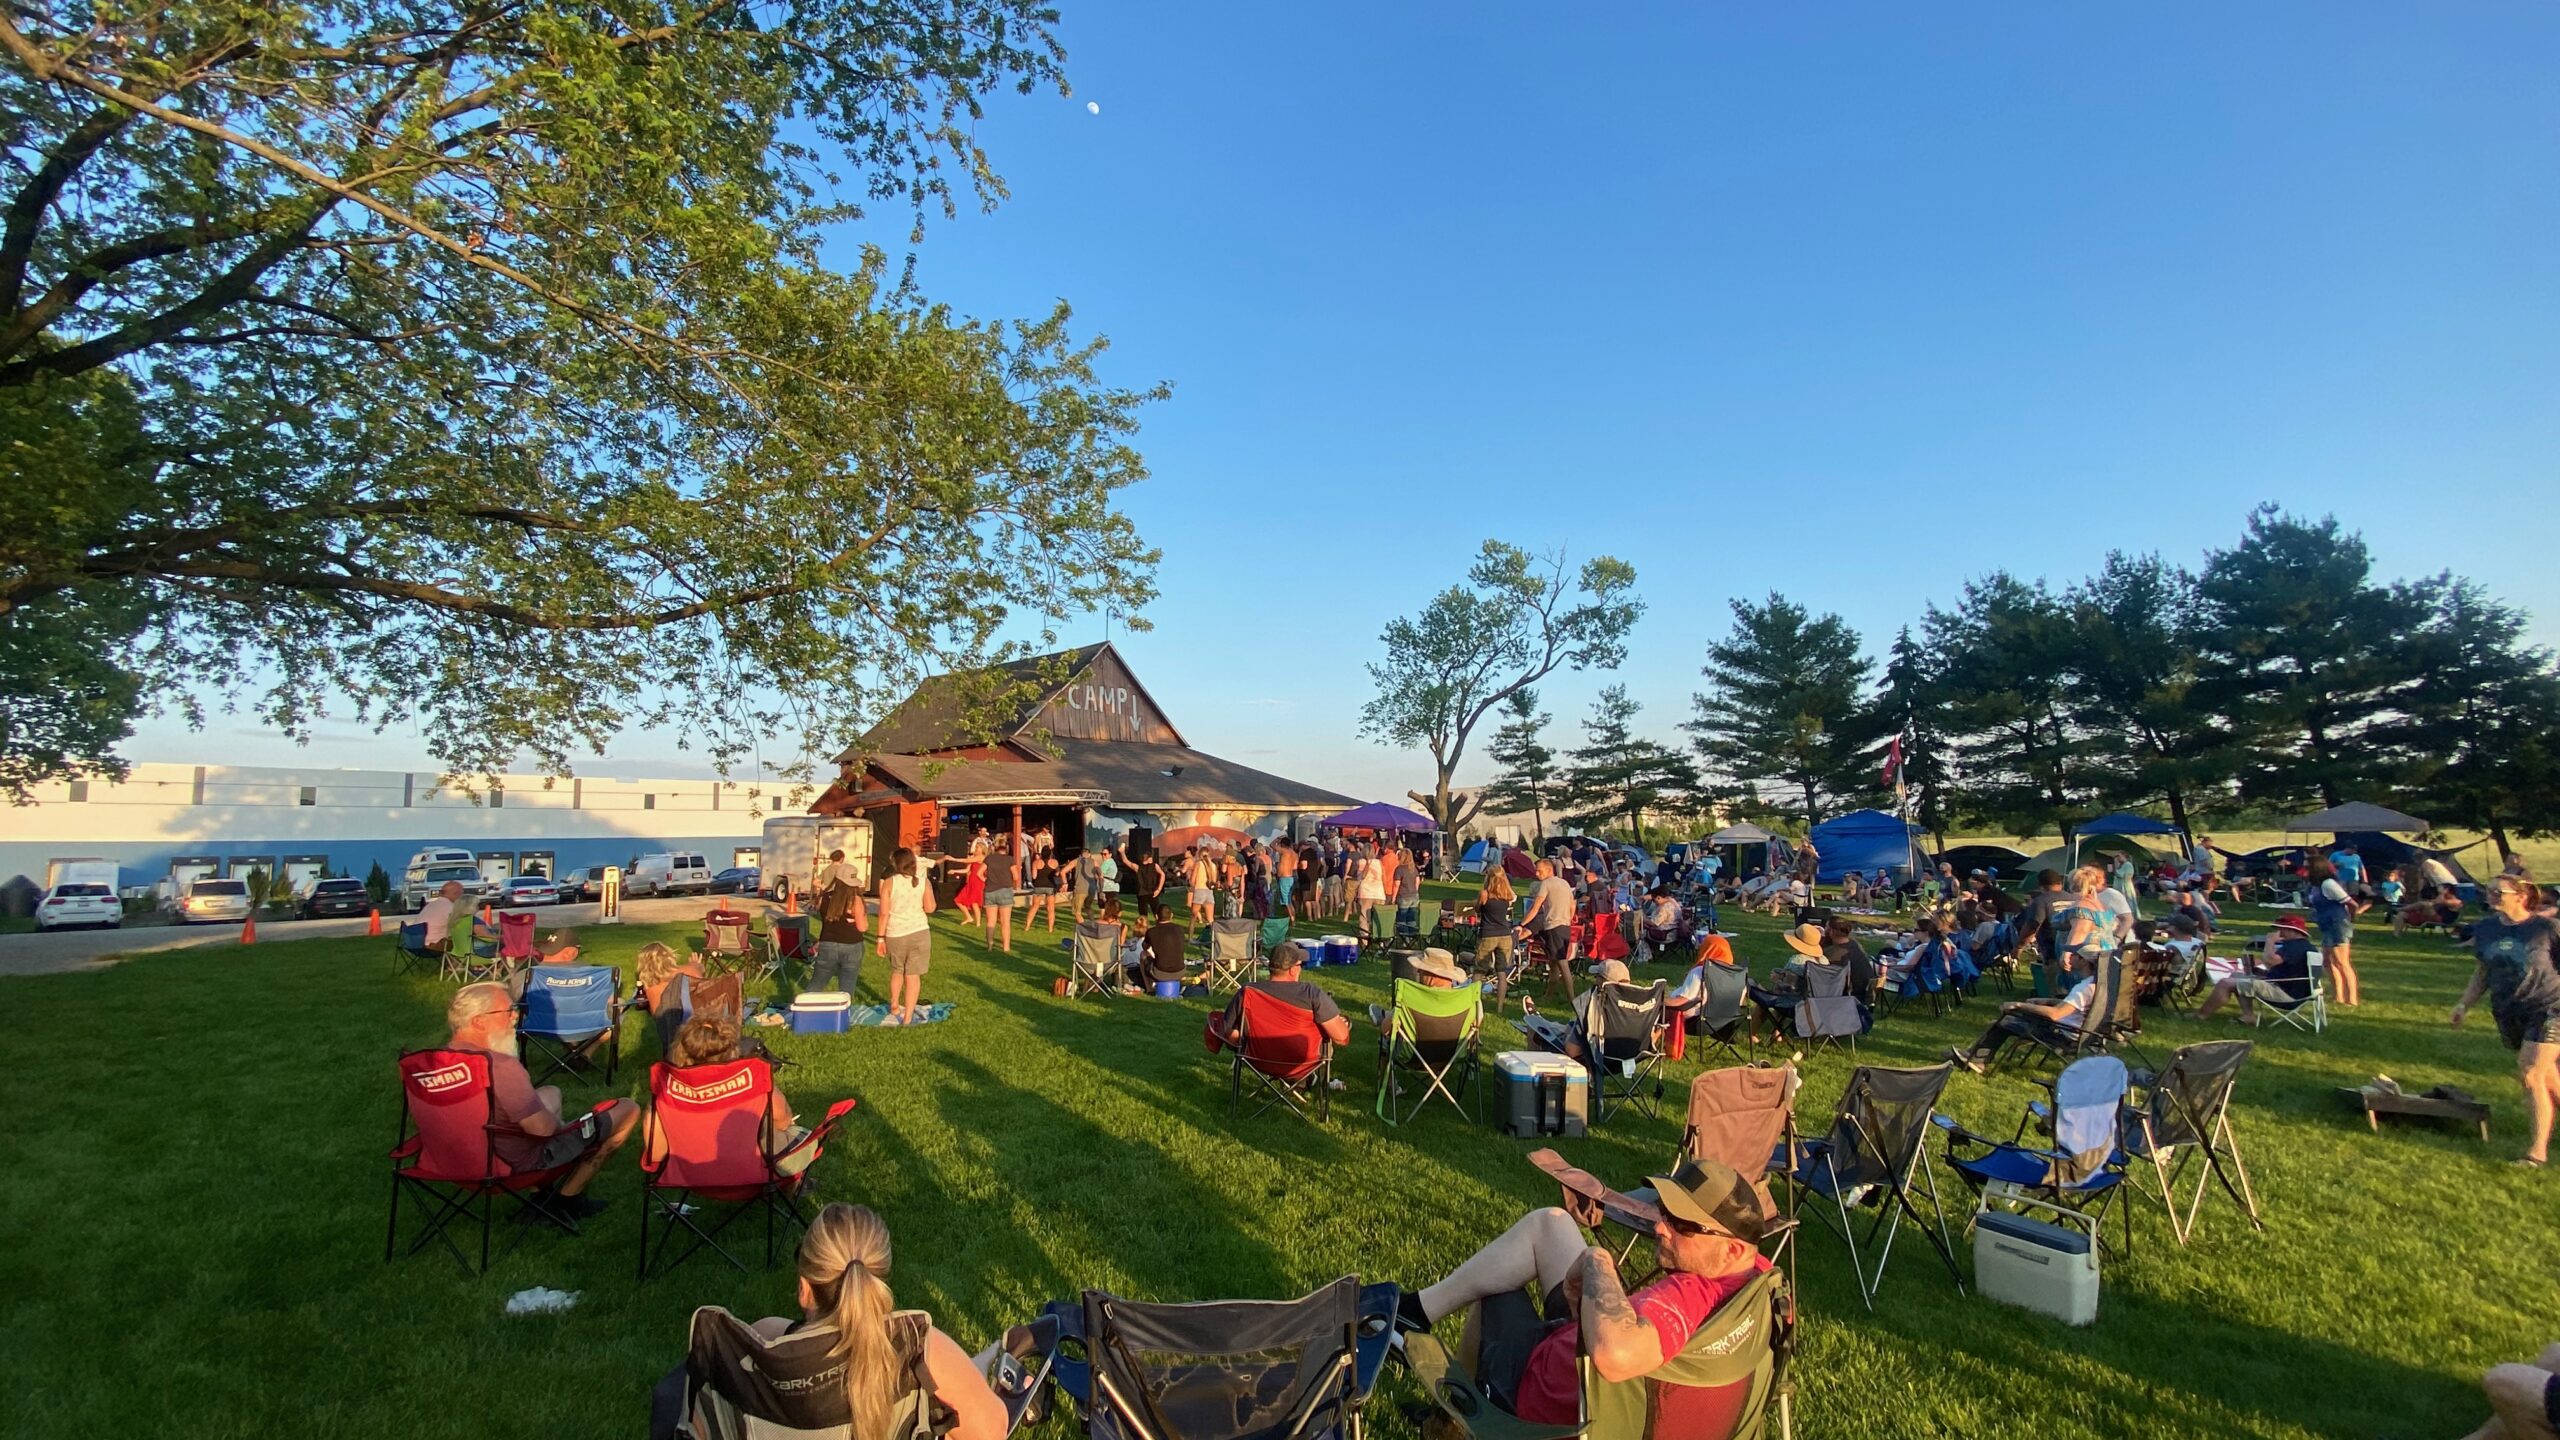 Concert-goers at Sleepybear Campground in Noblesville, IN